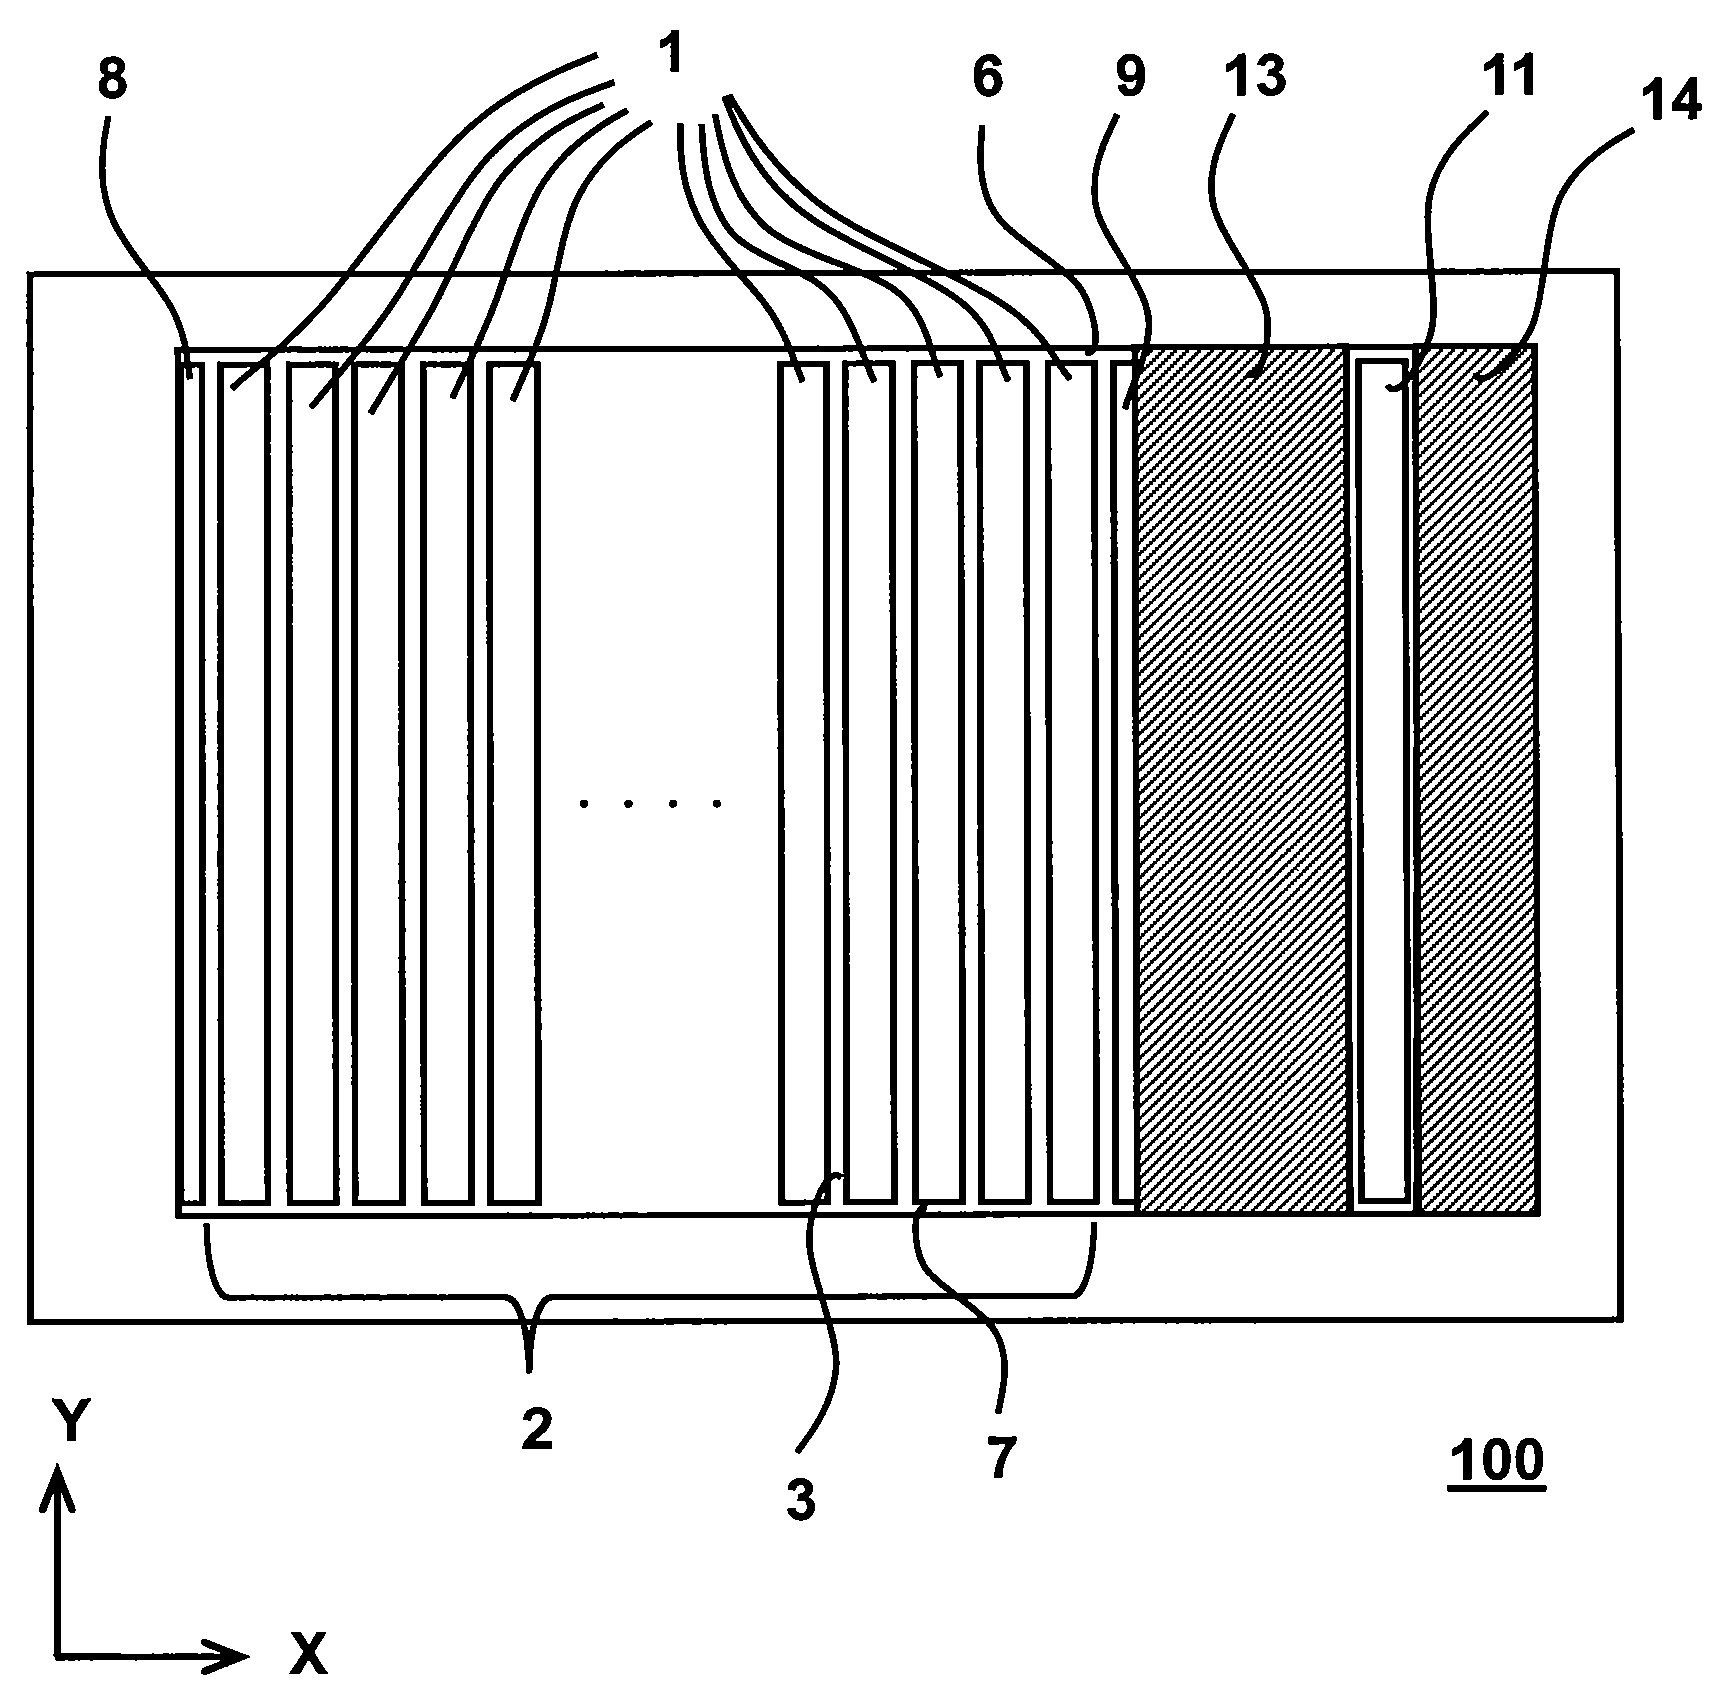 Reticle for projection exposure apparatus and exposure method using the same